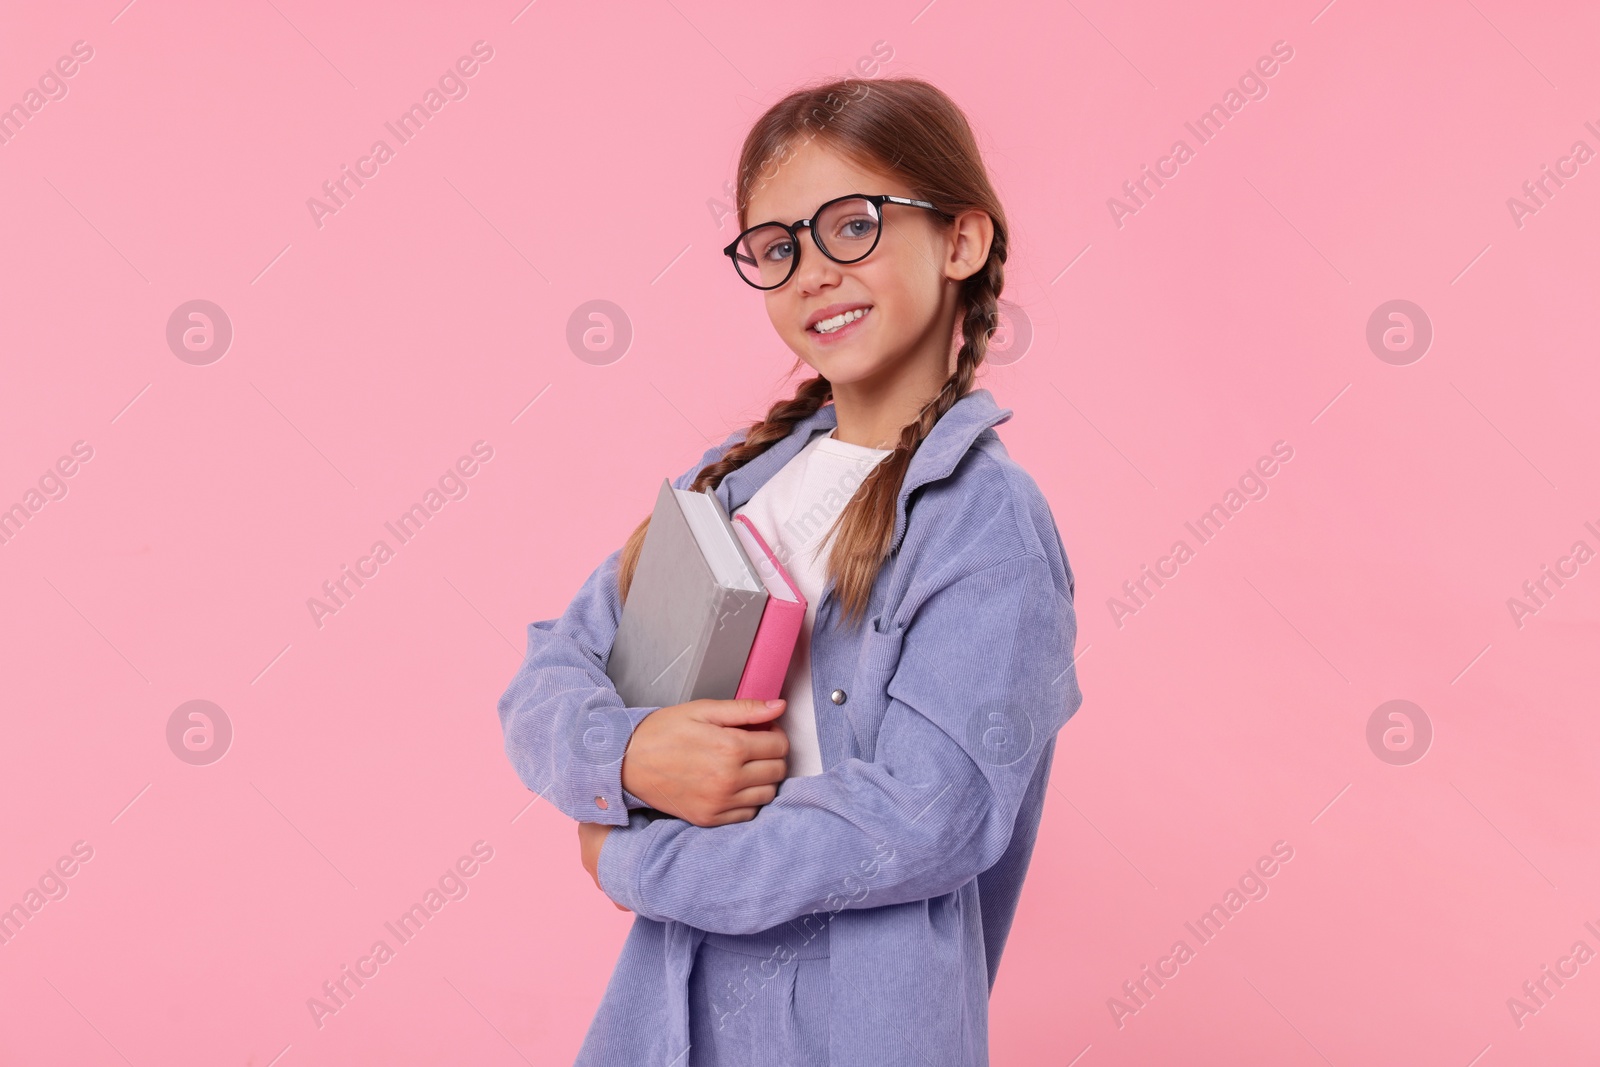 Photo of Smiling schoolgirl with books on pink background